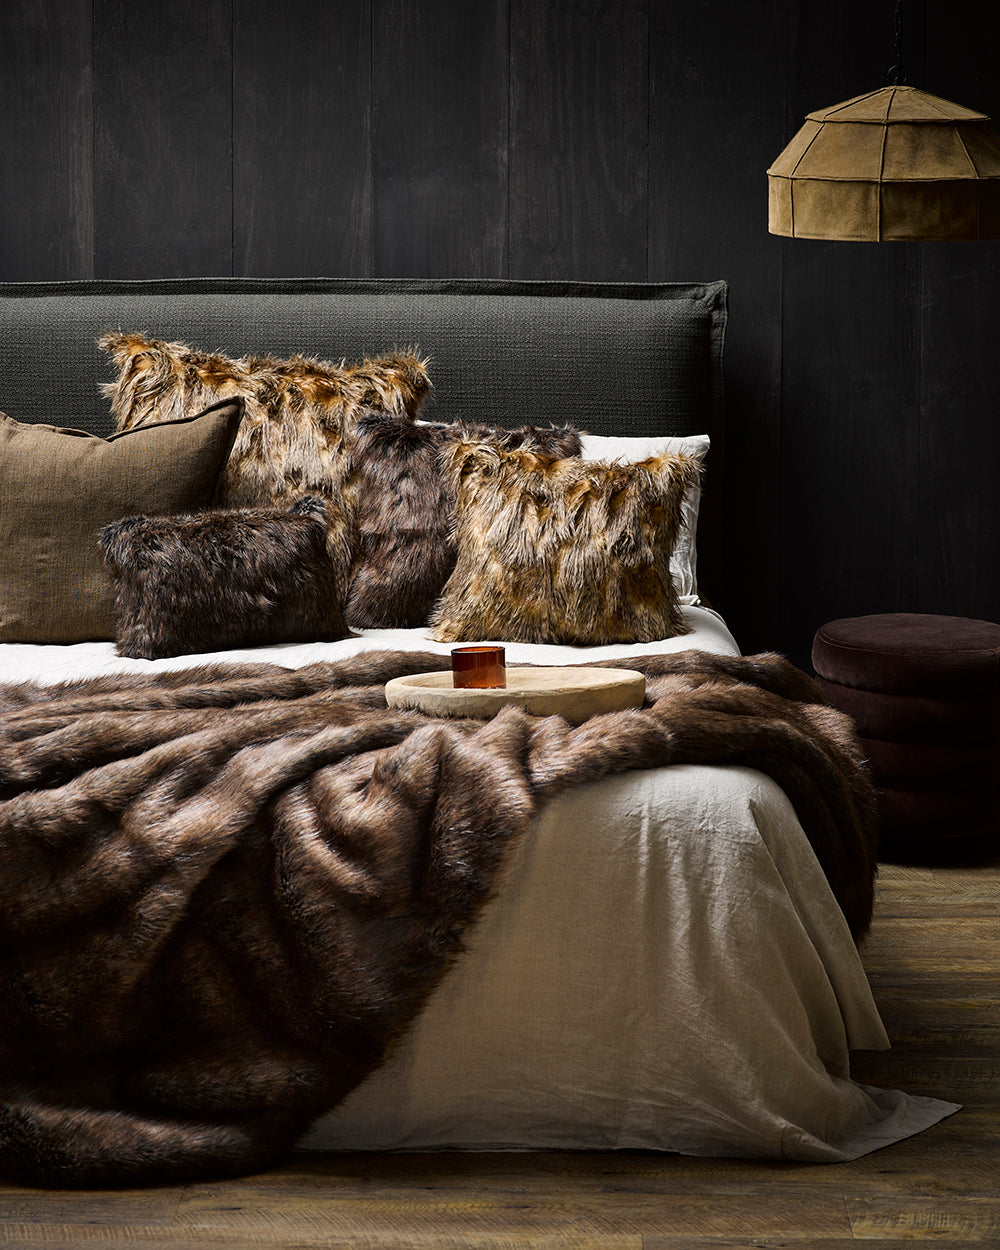 Imitation faux fur throw in Husky on bed with other fur cushions in a lifestyle shot